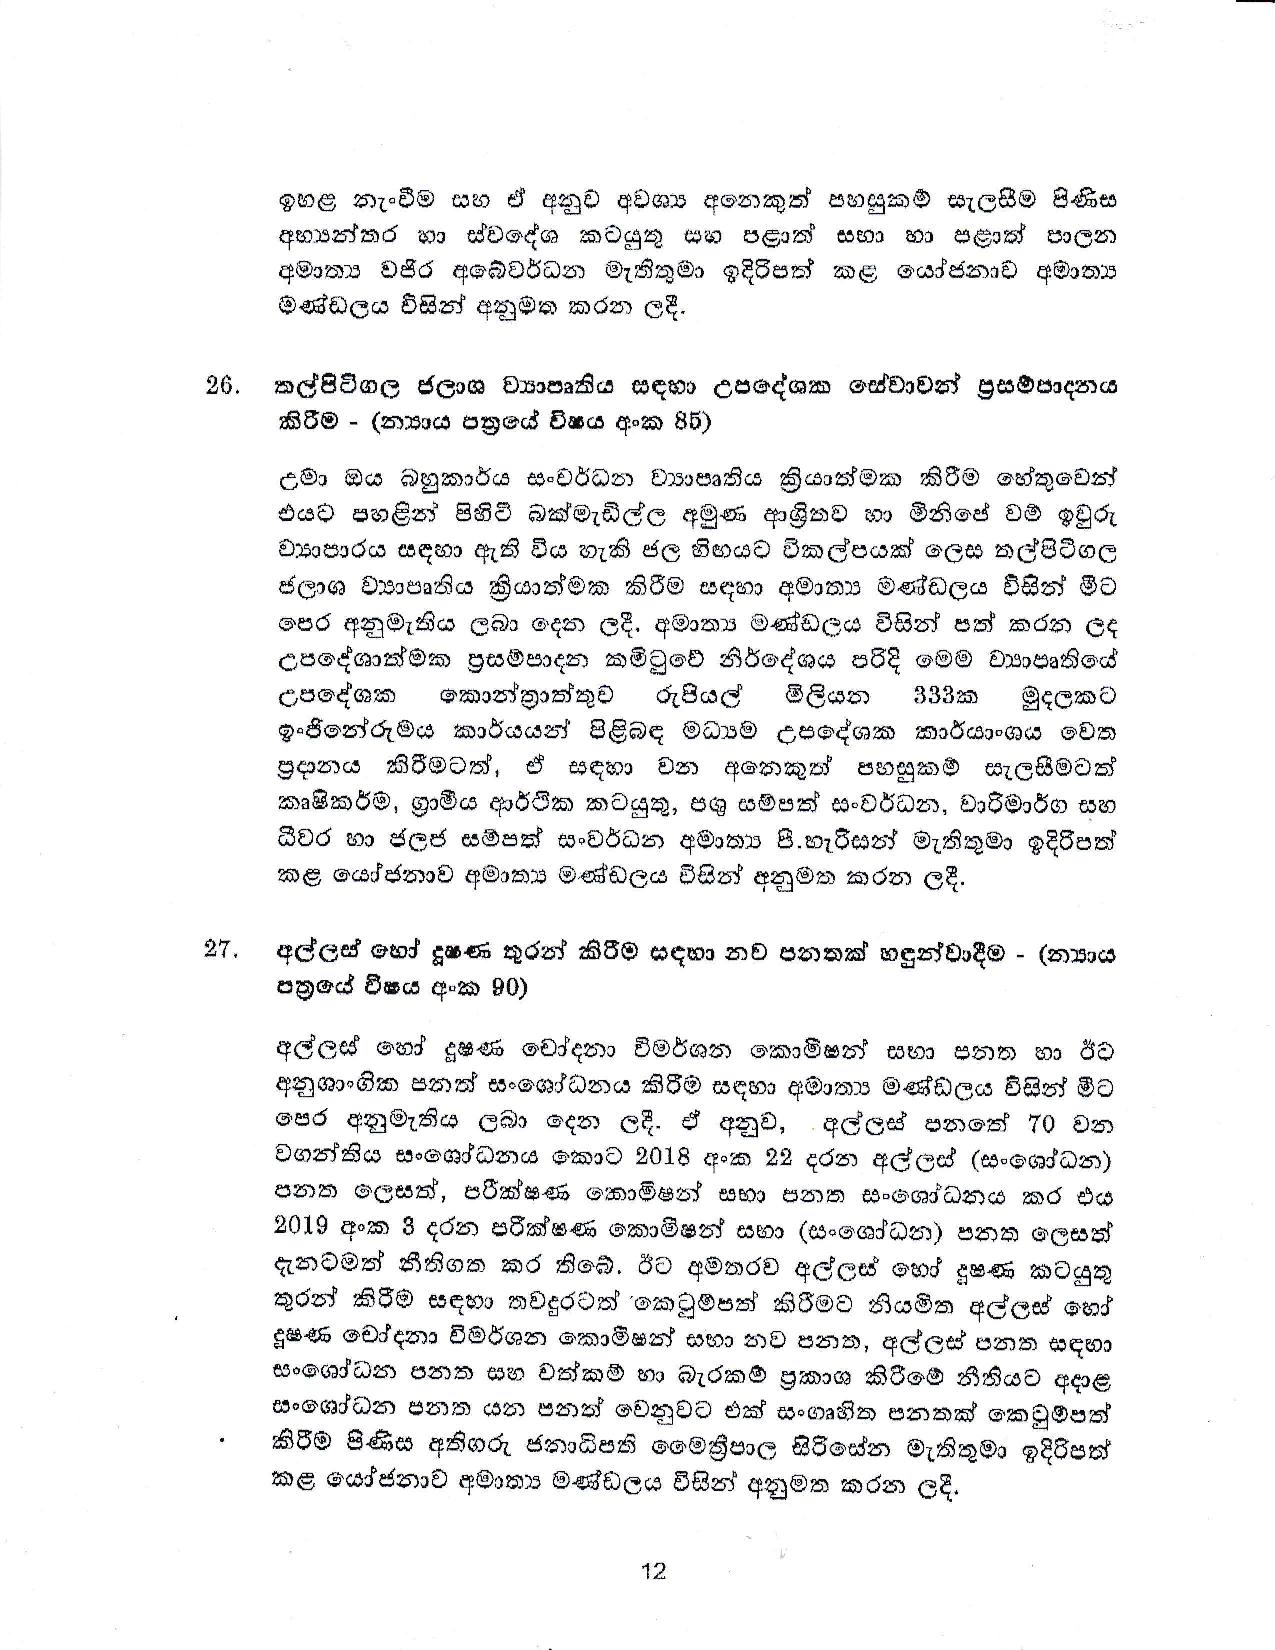 Cabinet Decision on 30.04.2019 page 012